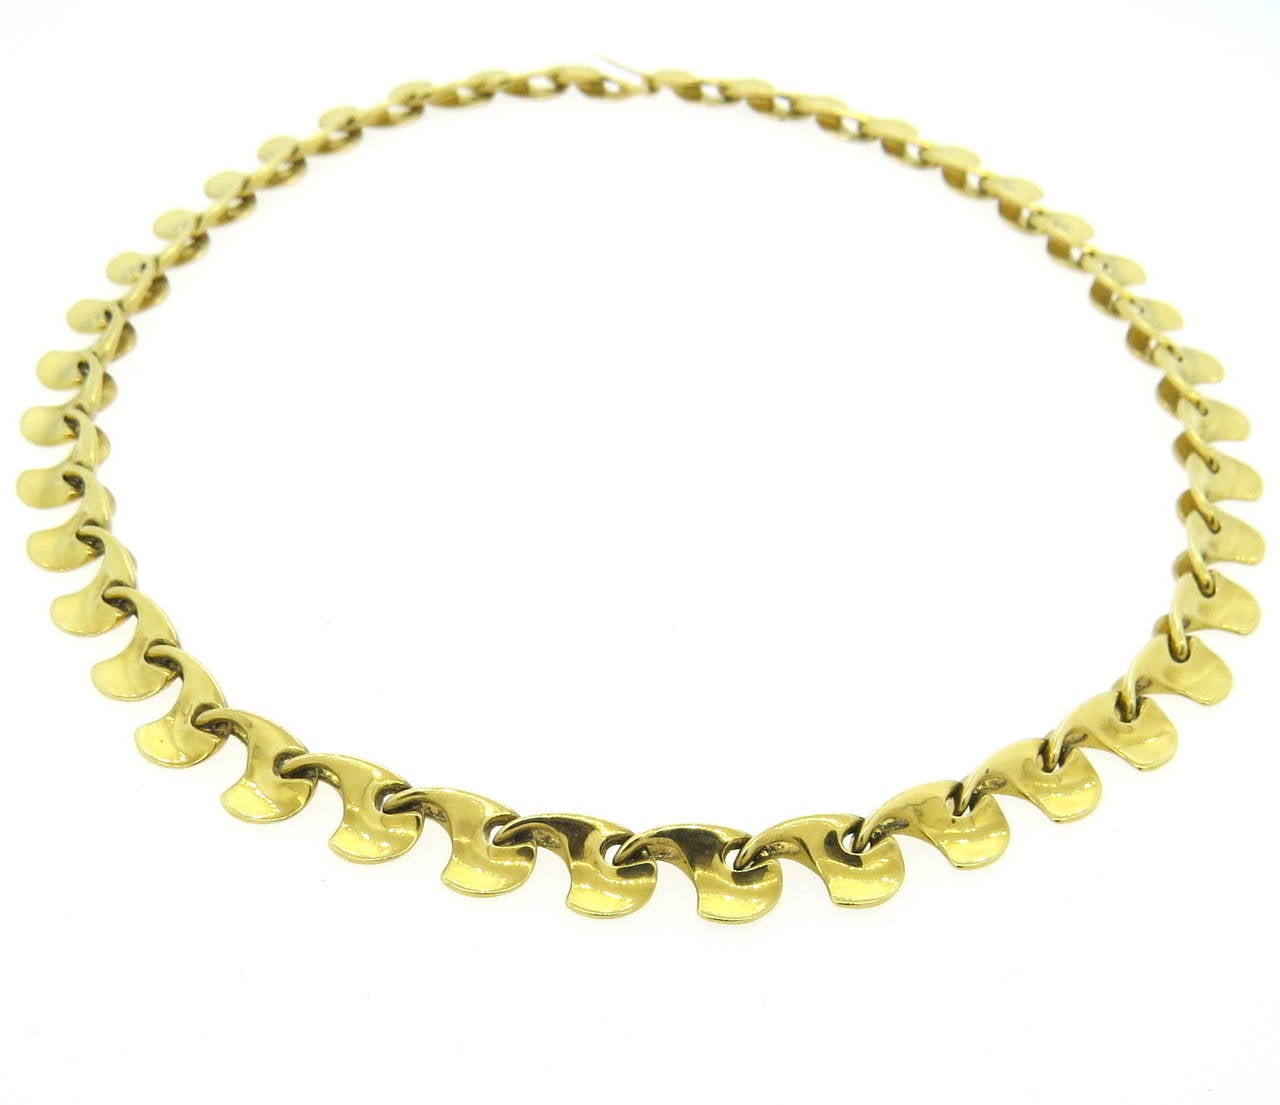 Modernist Gold Swirl Necklace and Earrings Set 1